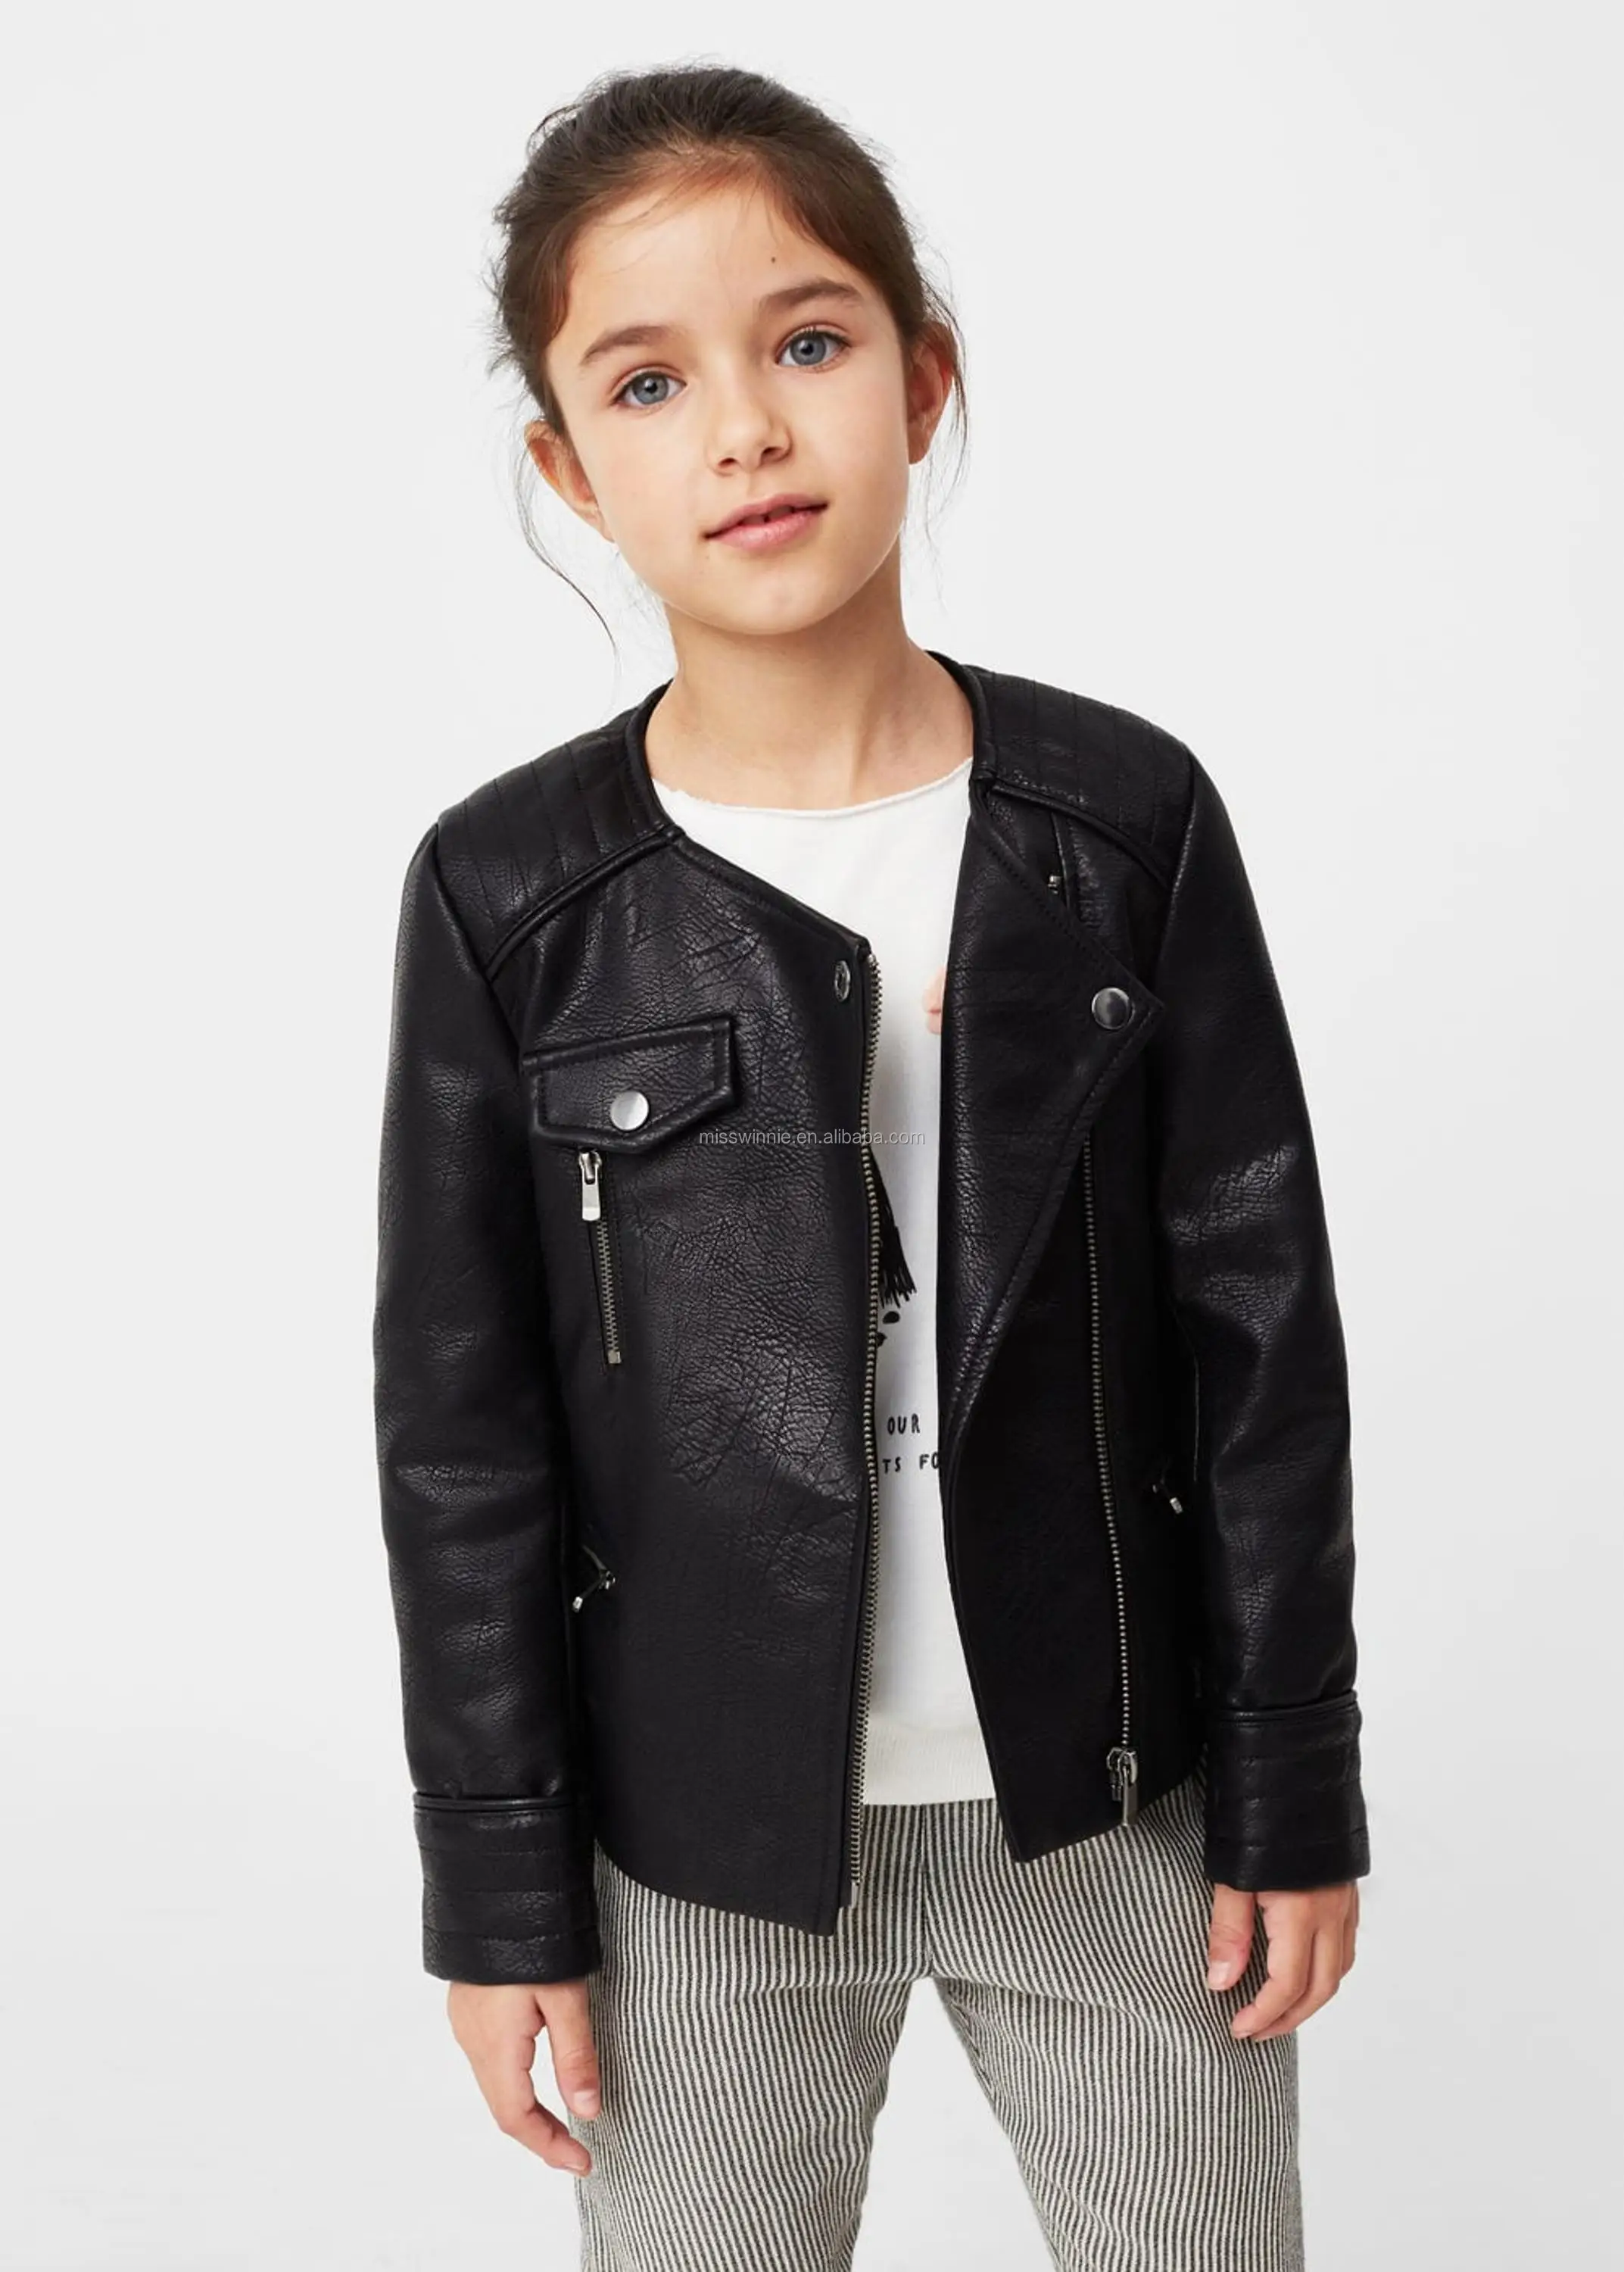 Kids Girl Leather Jacket Pure Pattern Casual Style New Fashion Clothing ...